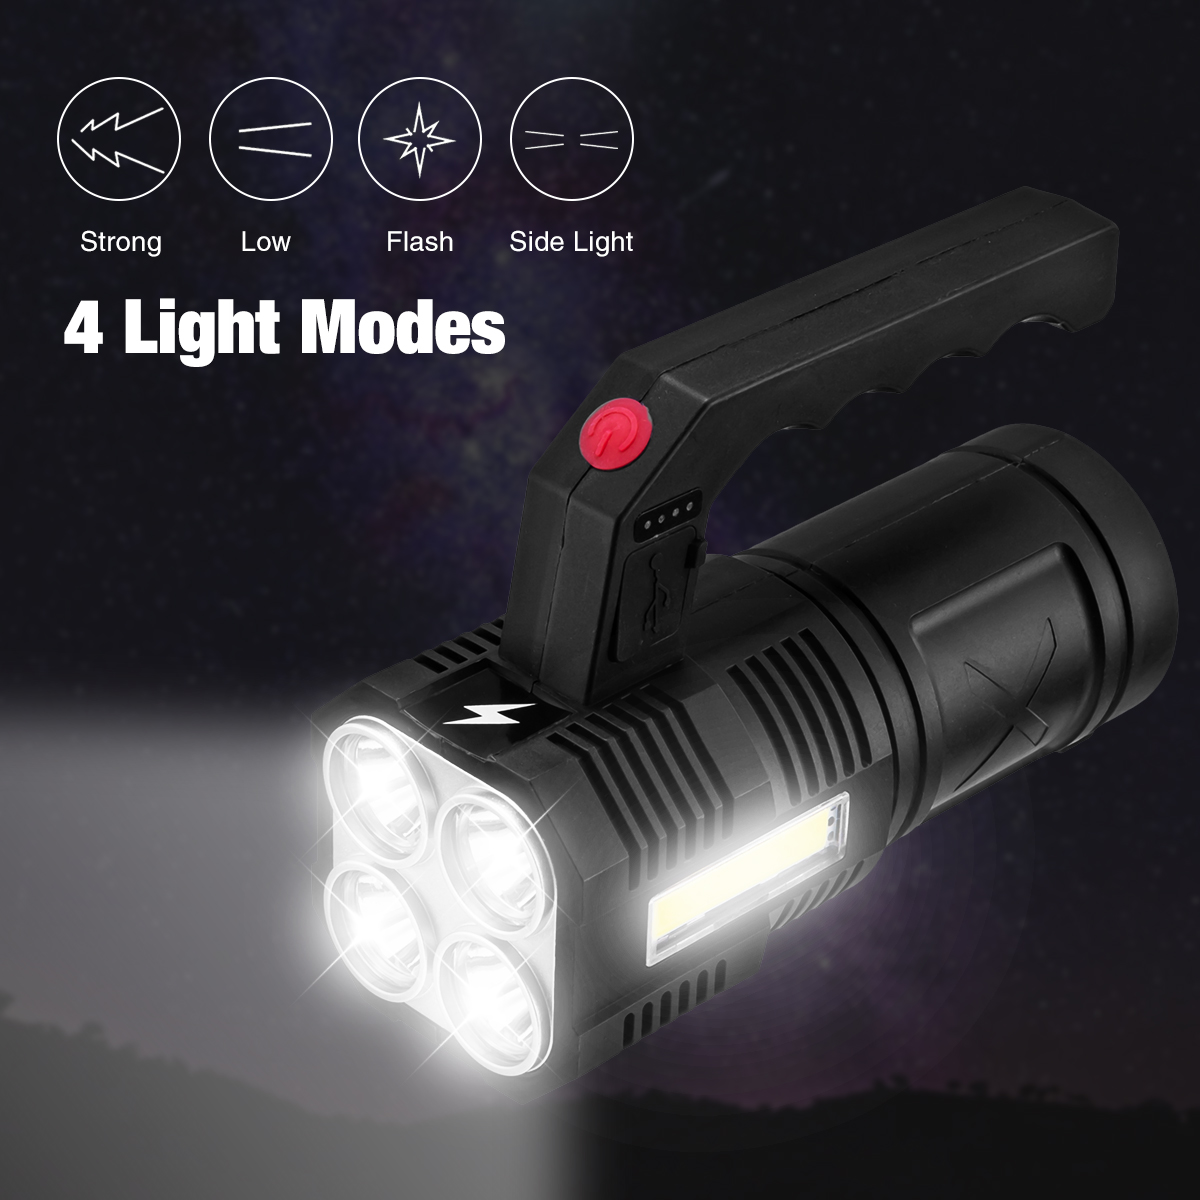 Super Bright Torch Searchlight, Easy To Carry OSL Lamp Source US Plug  100-240V ABS Housing USB Port Handheld Flashlight for Expedition for Outdoor